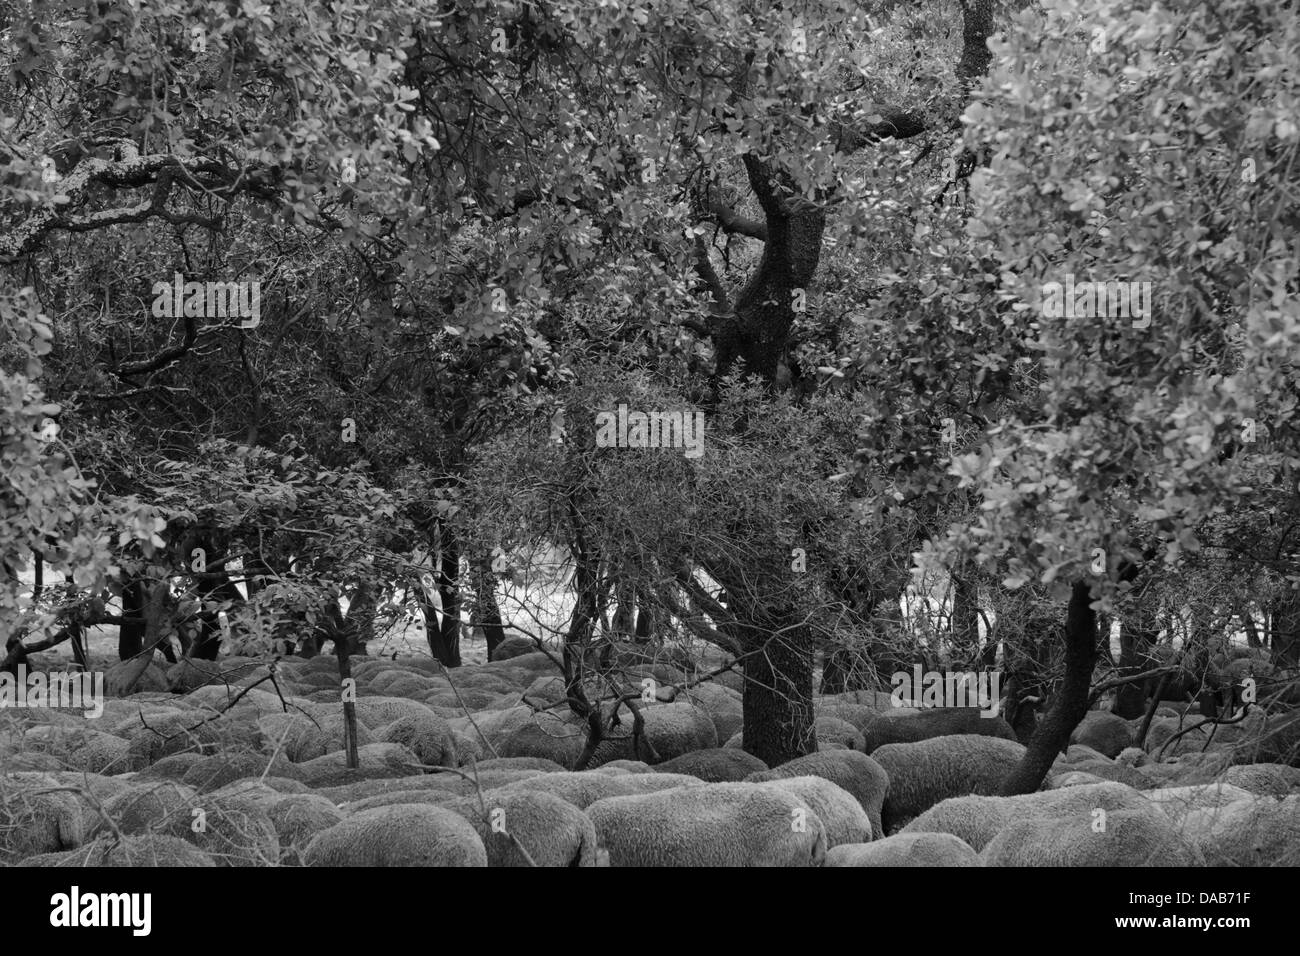 Sheep lying under the trees in France Stock Photo